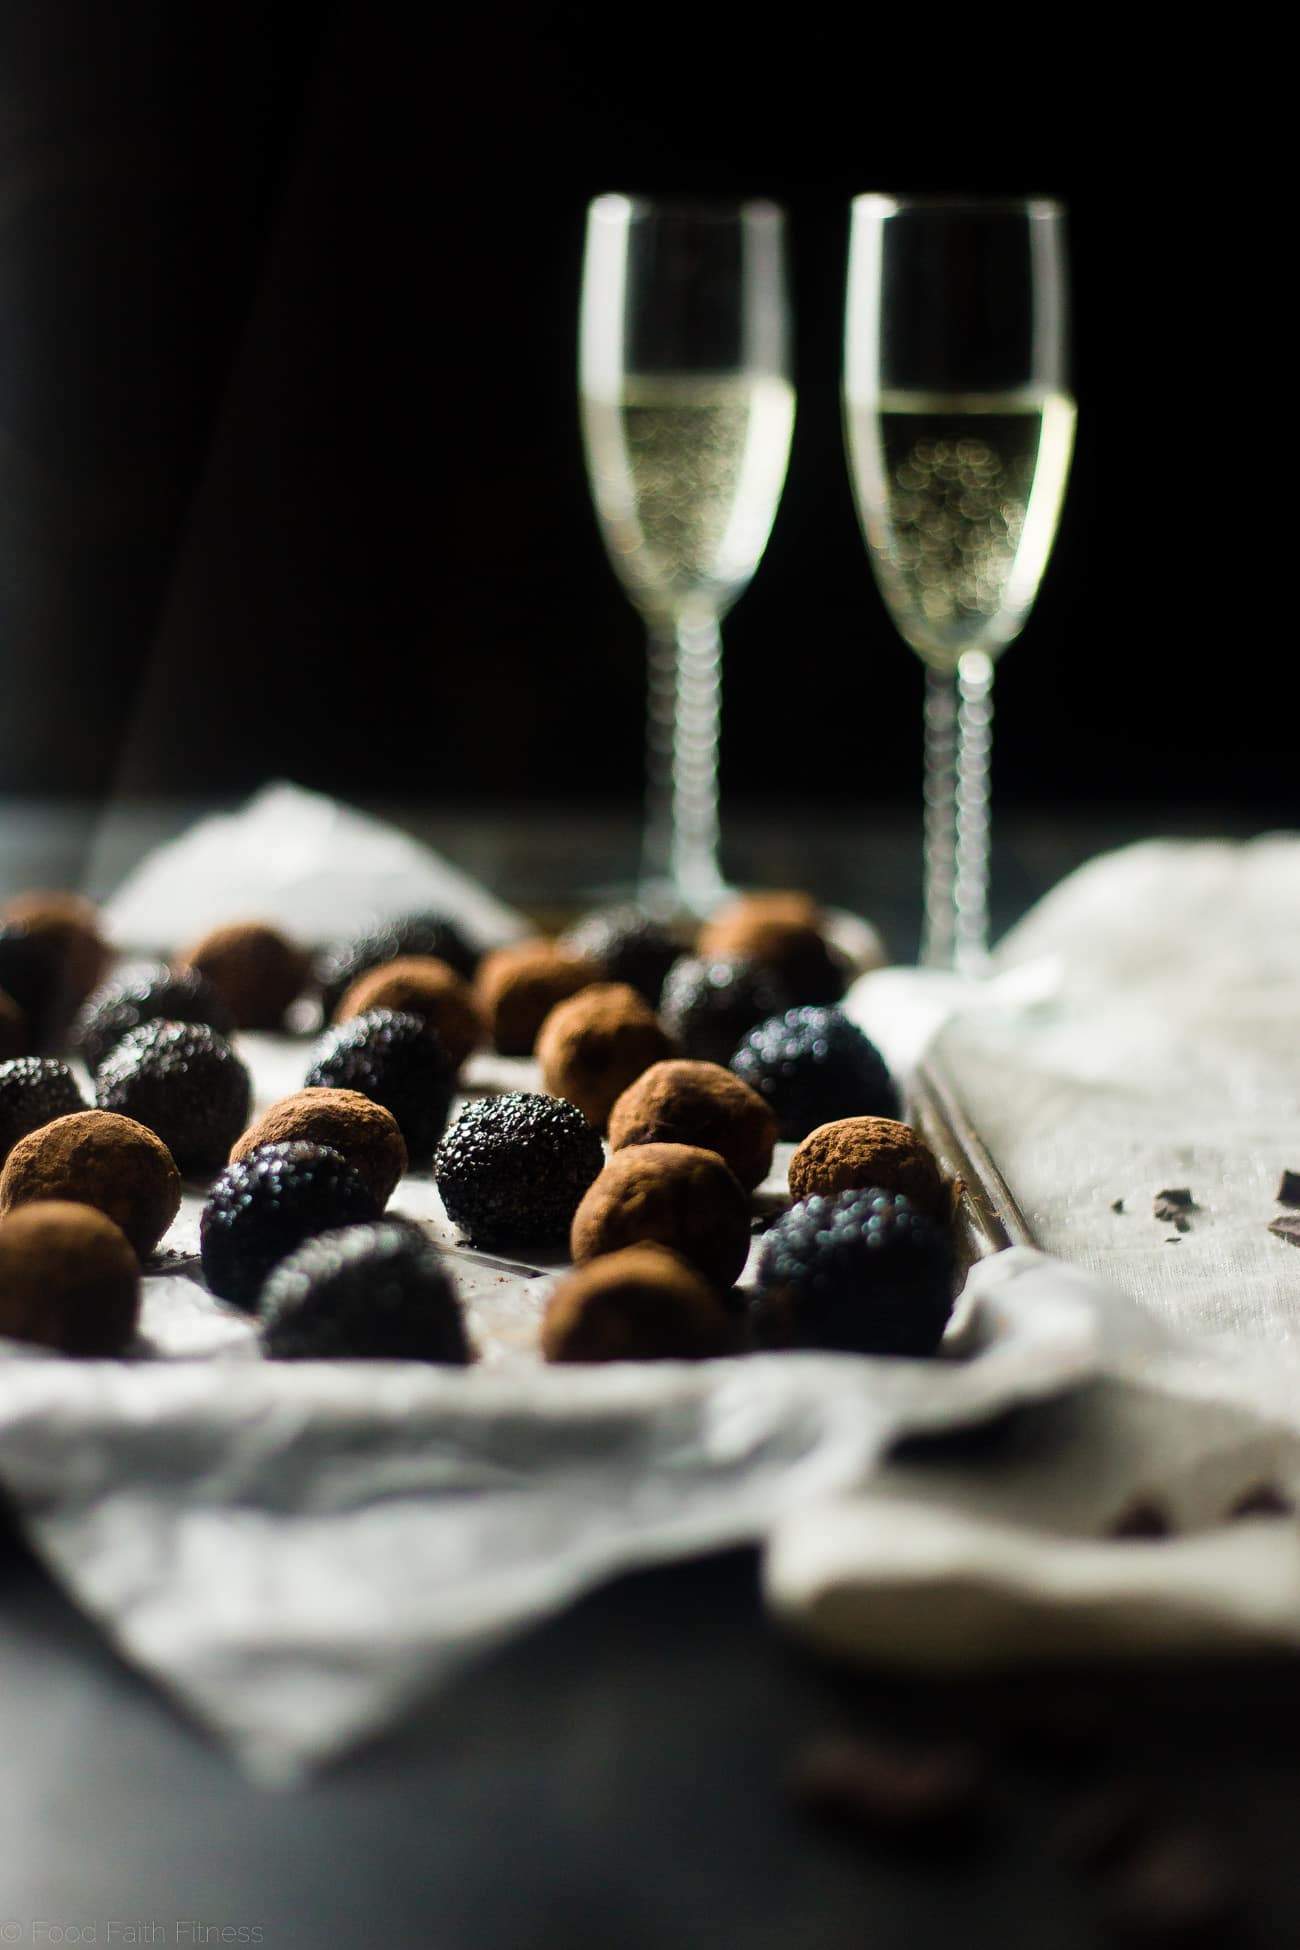 Avocado Vegan Chocolate Truffles with Champagne - These 5 ingredient, vegan truffles use a secret, heart-healthy ingredient to make them so creamy and only 60 calories! A little champagne makes them perfect for New years Eve! | #Foodfaithfitness | #Glutenfree #Vegan #Healthy #Avocado #Truffles